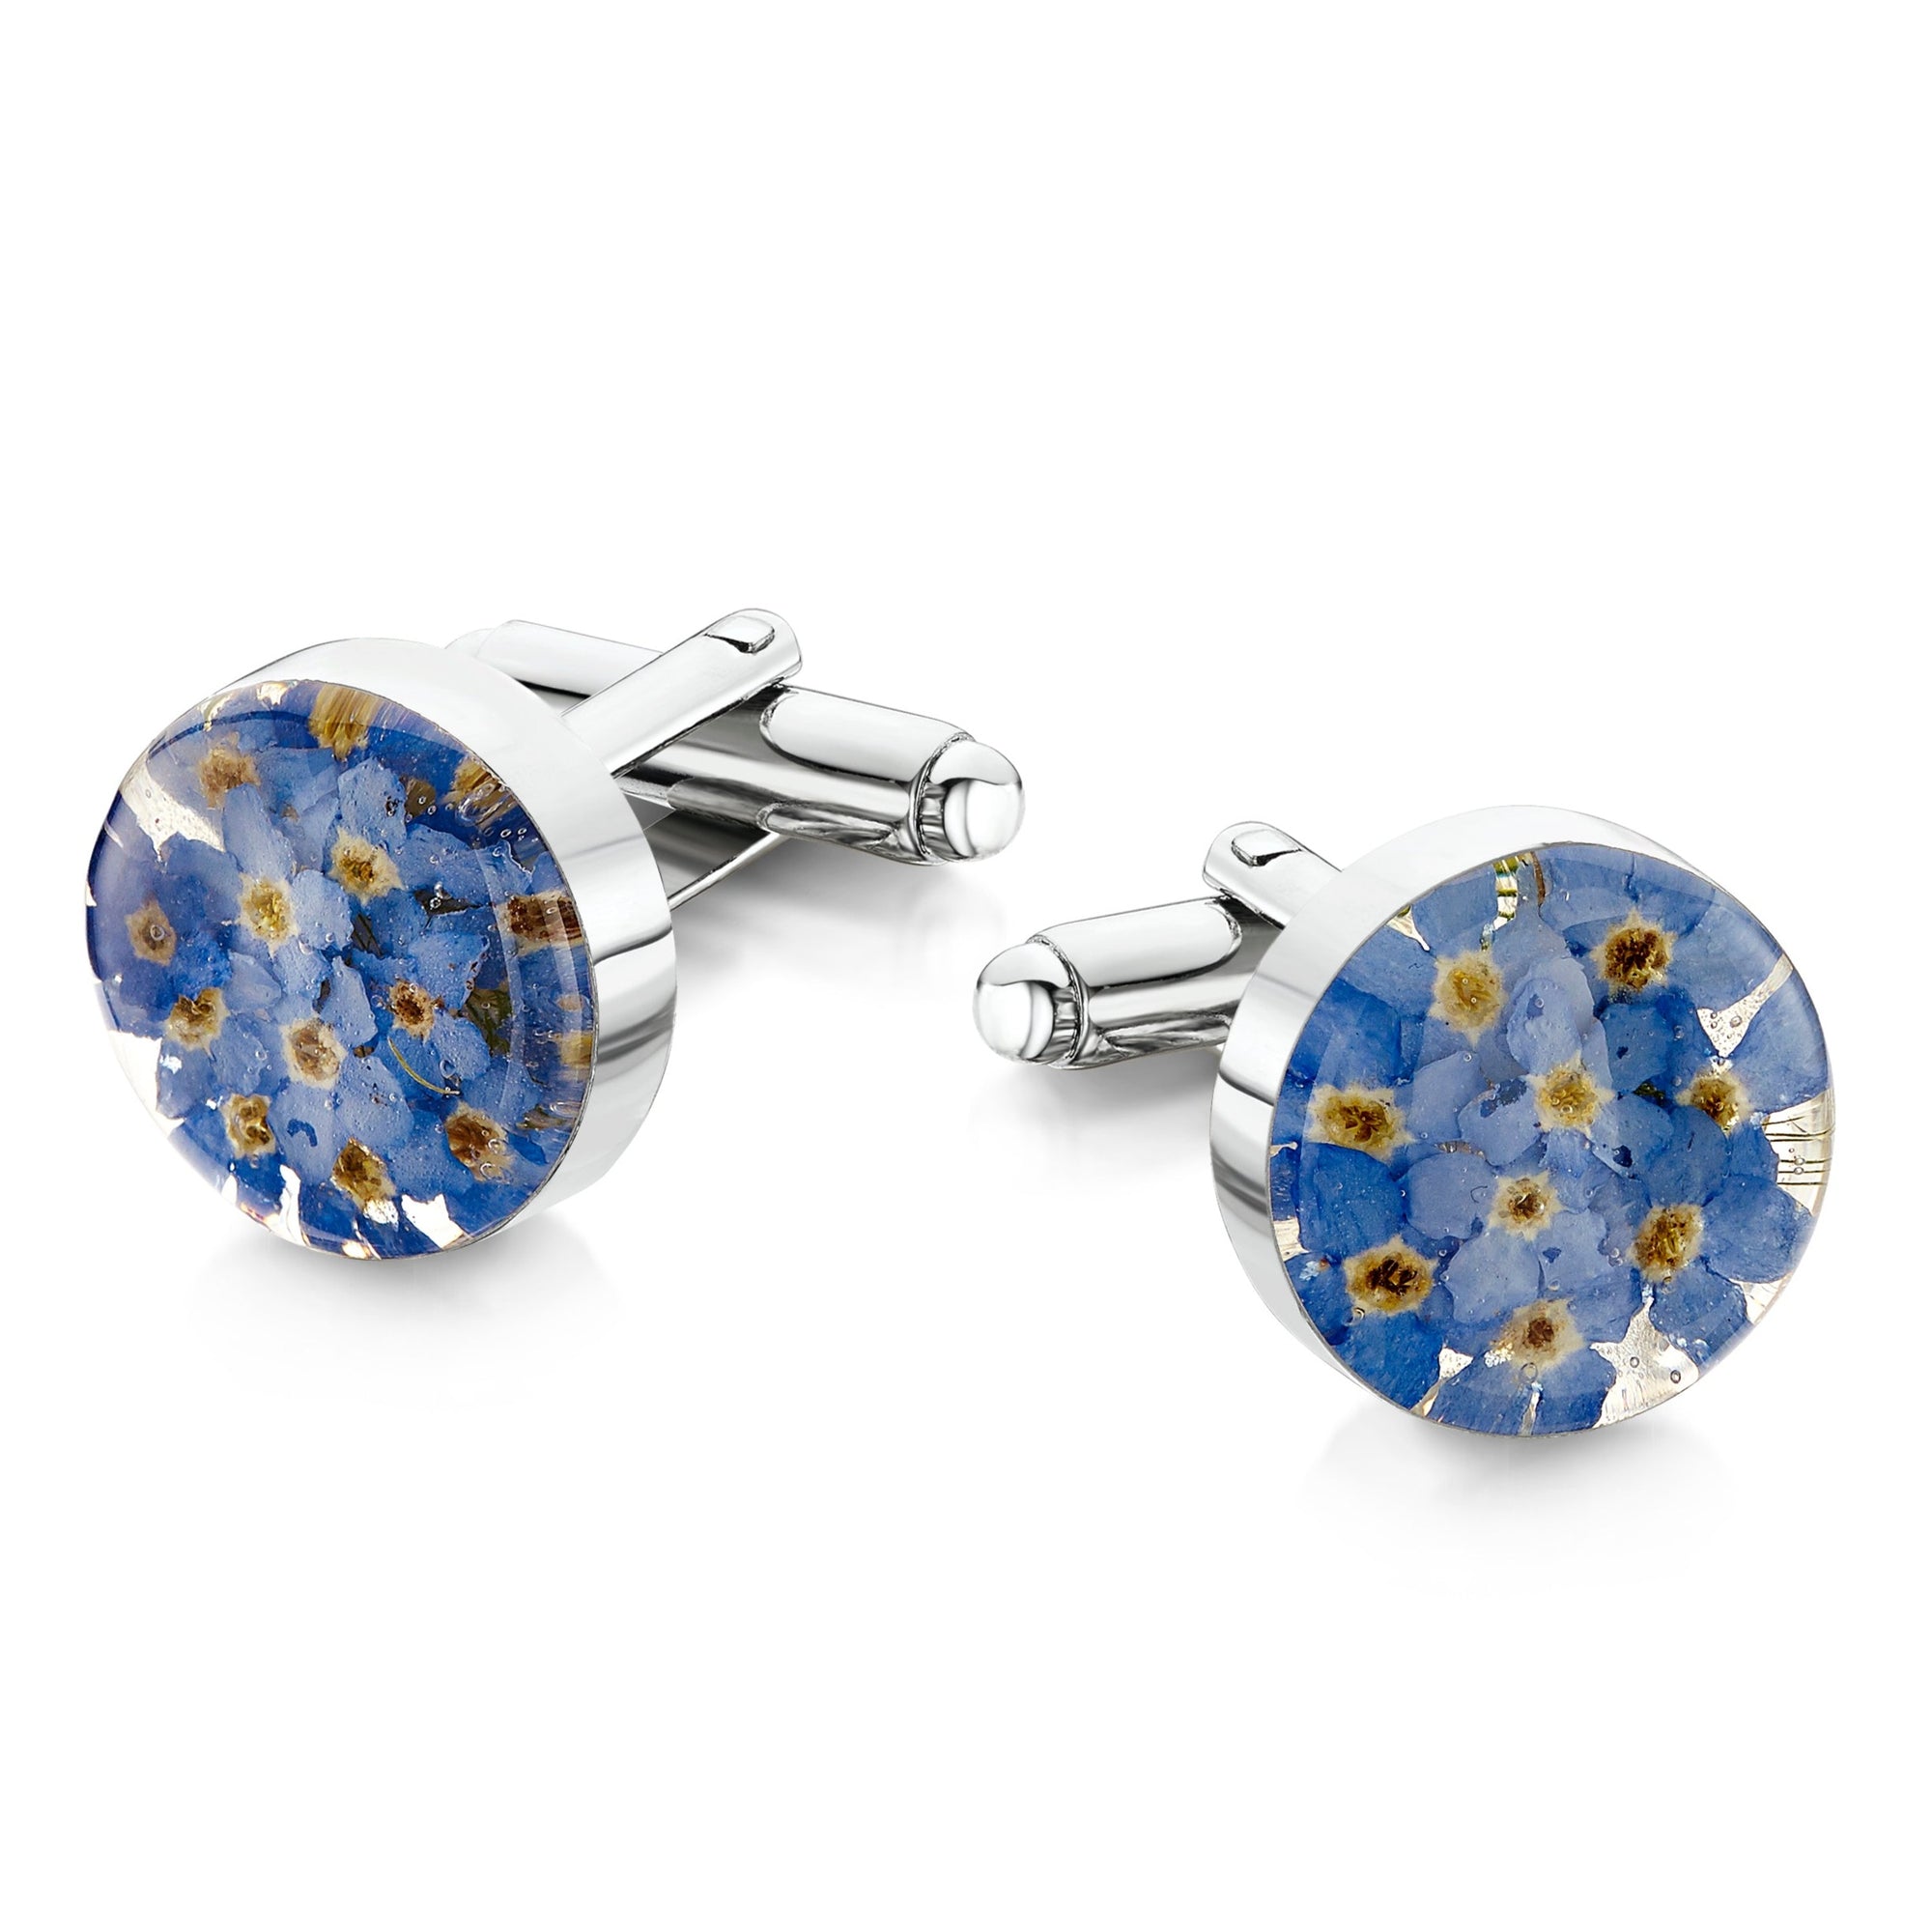 Sterling silver round cufflinks with real forget-me-not flowers set in resin.